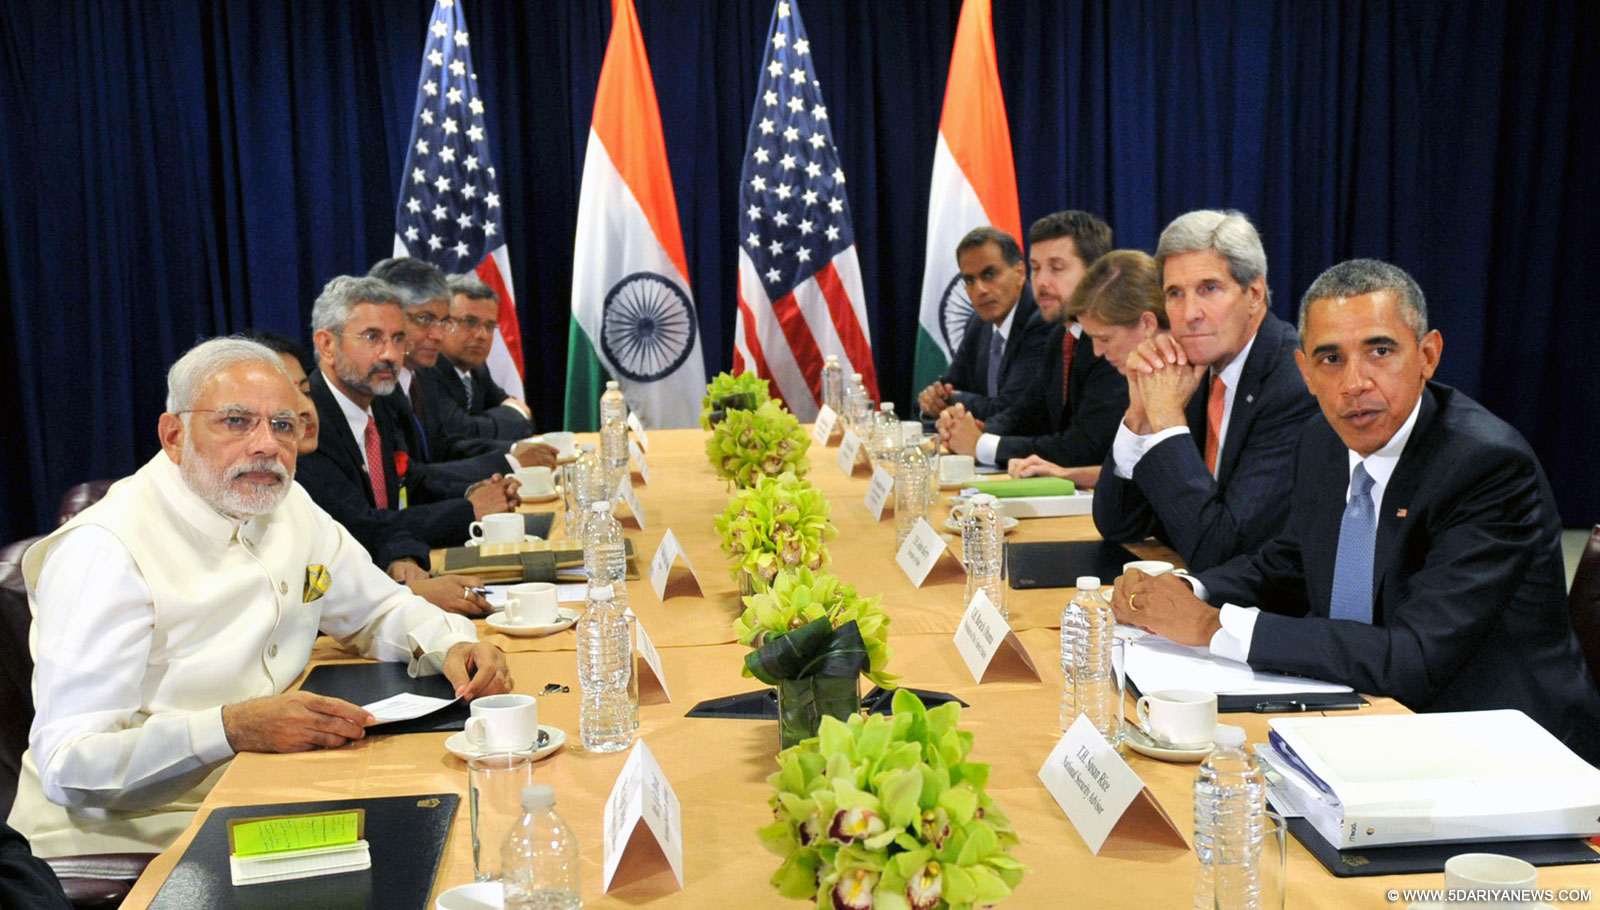 The Prime Minister, Shri Narendra Modi delivering his statement to the media, in the Joint Press Briefing with the President of United States of America (USA), Mr. Barack Obama, in New York on September 28, 2015.